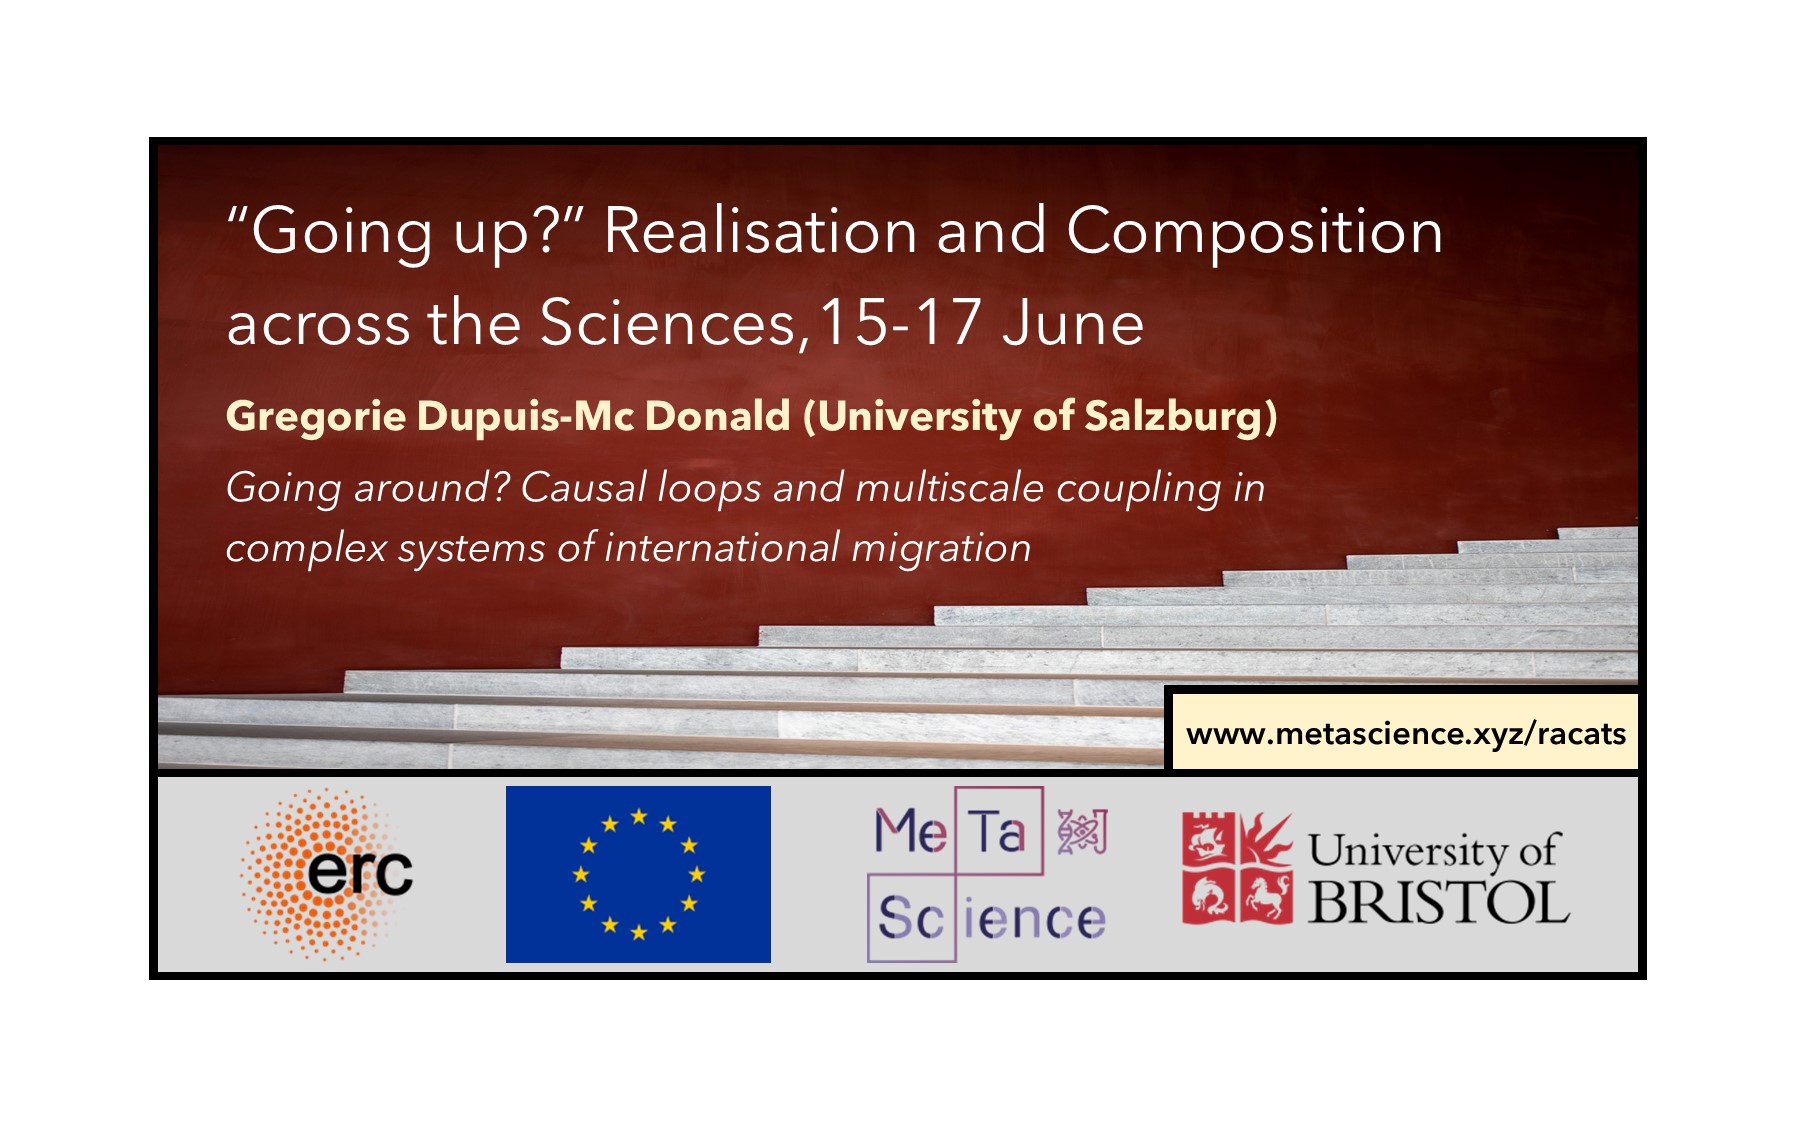 infrastruktur Alvorlig excitation MetaScience on Twitter: "Gregorie Dupuis-Mc Donald (University of Salzburg)  really piqued the reviewers' interest with this submission! 'Going around?  #CausalLoops and multiscale coupling in #ComplexSystems of  #InternationalMigration'. 14:45 BST ...